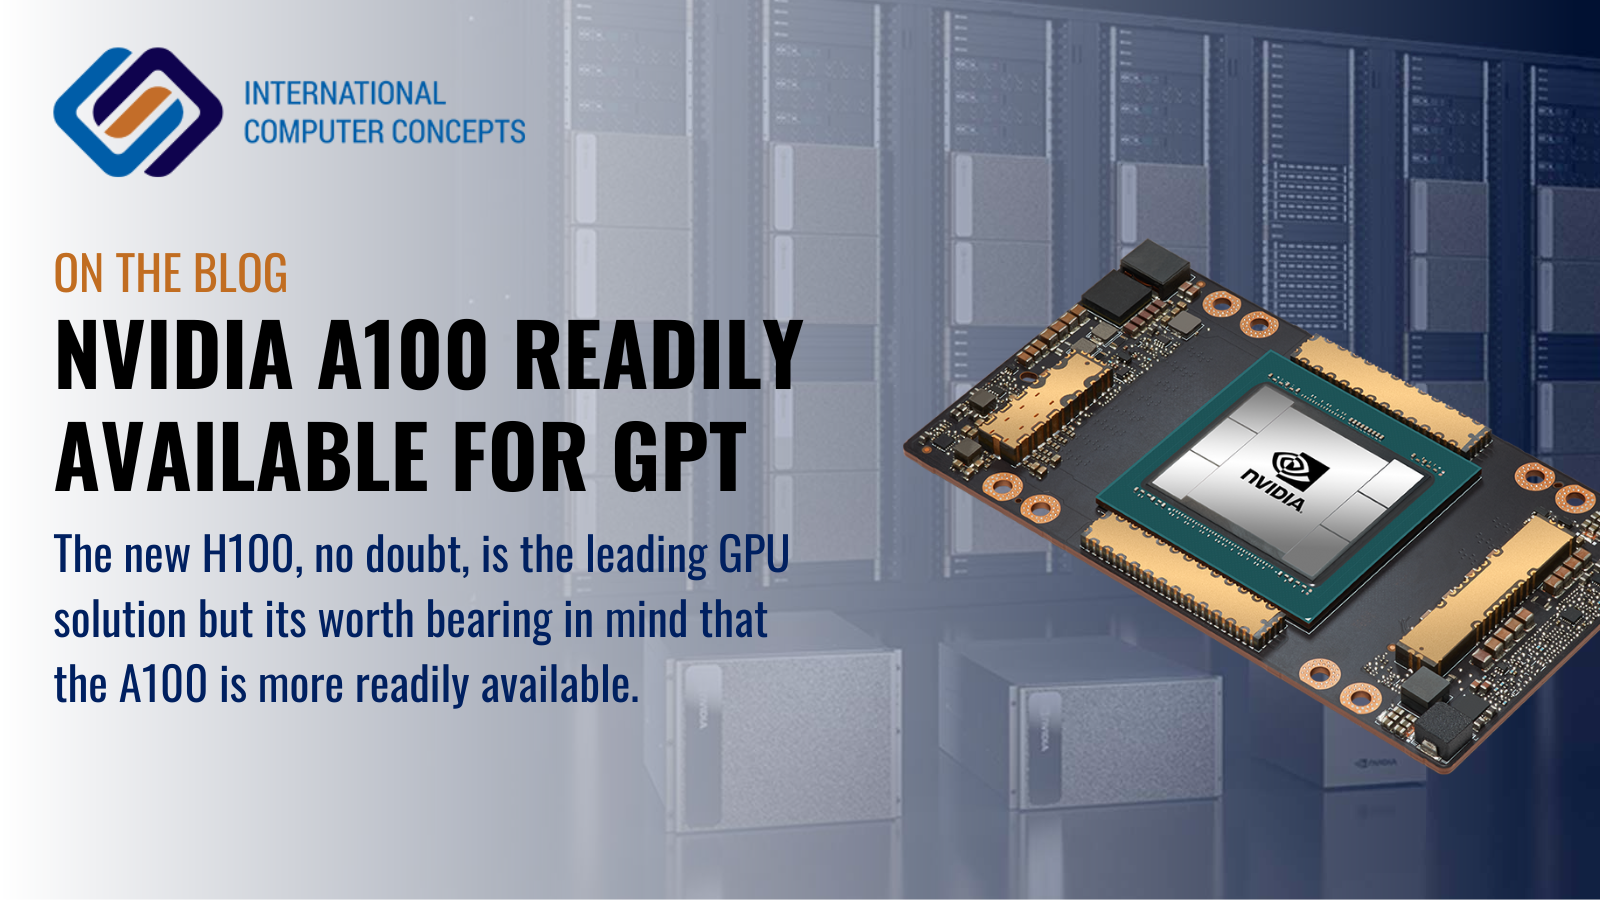 NVIDIA A100 still a premier punt for A.I. and all things GPT